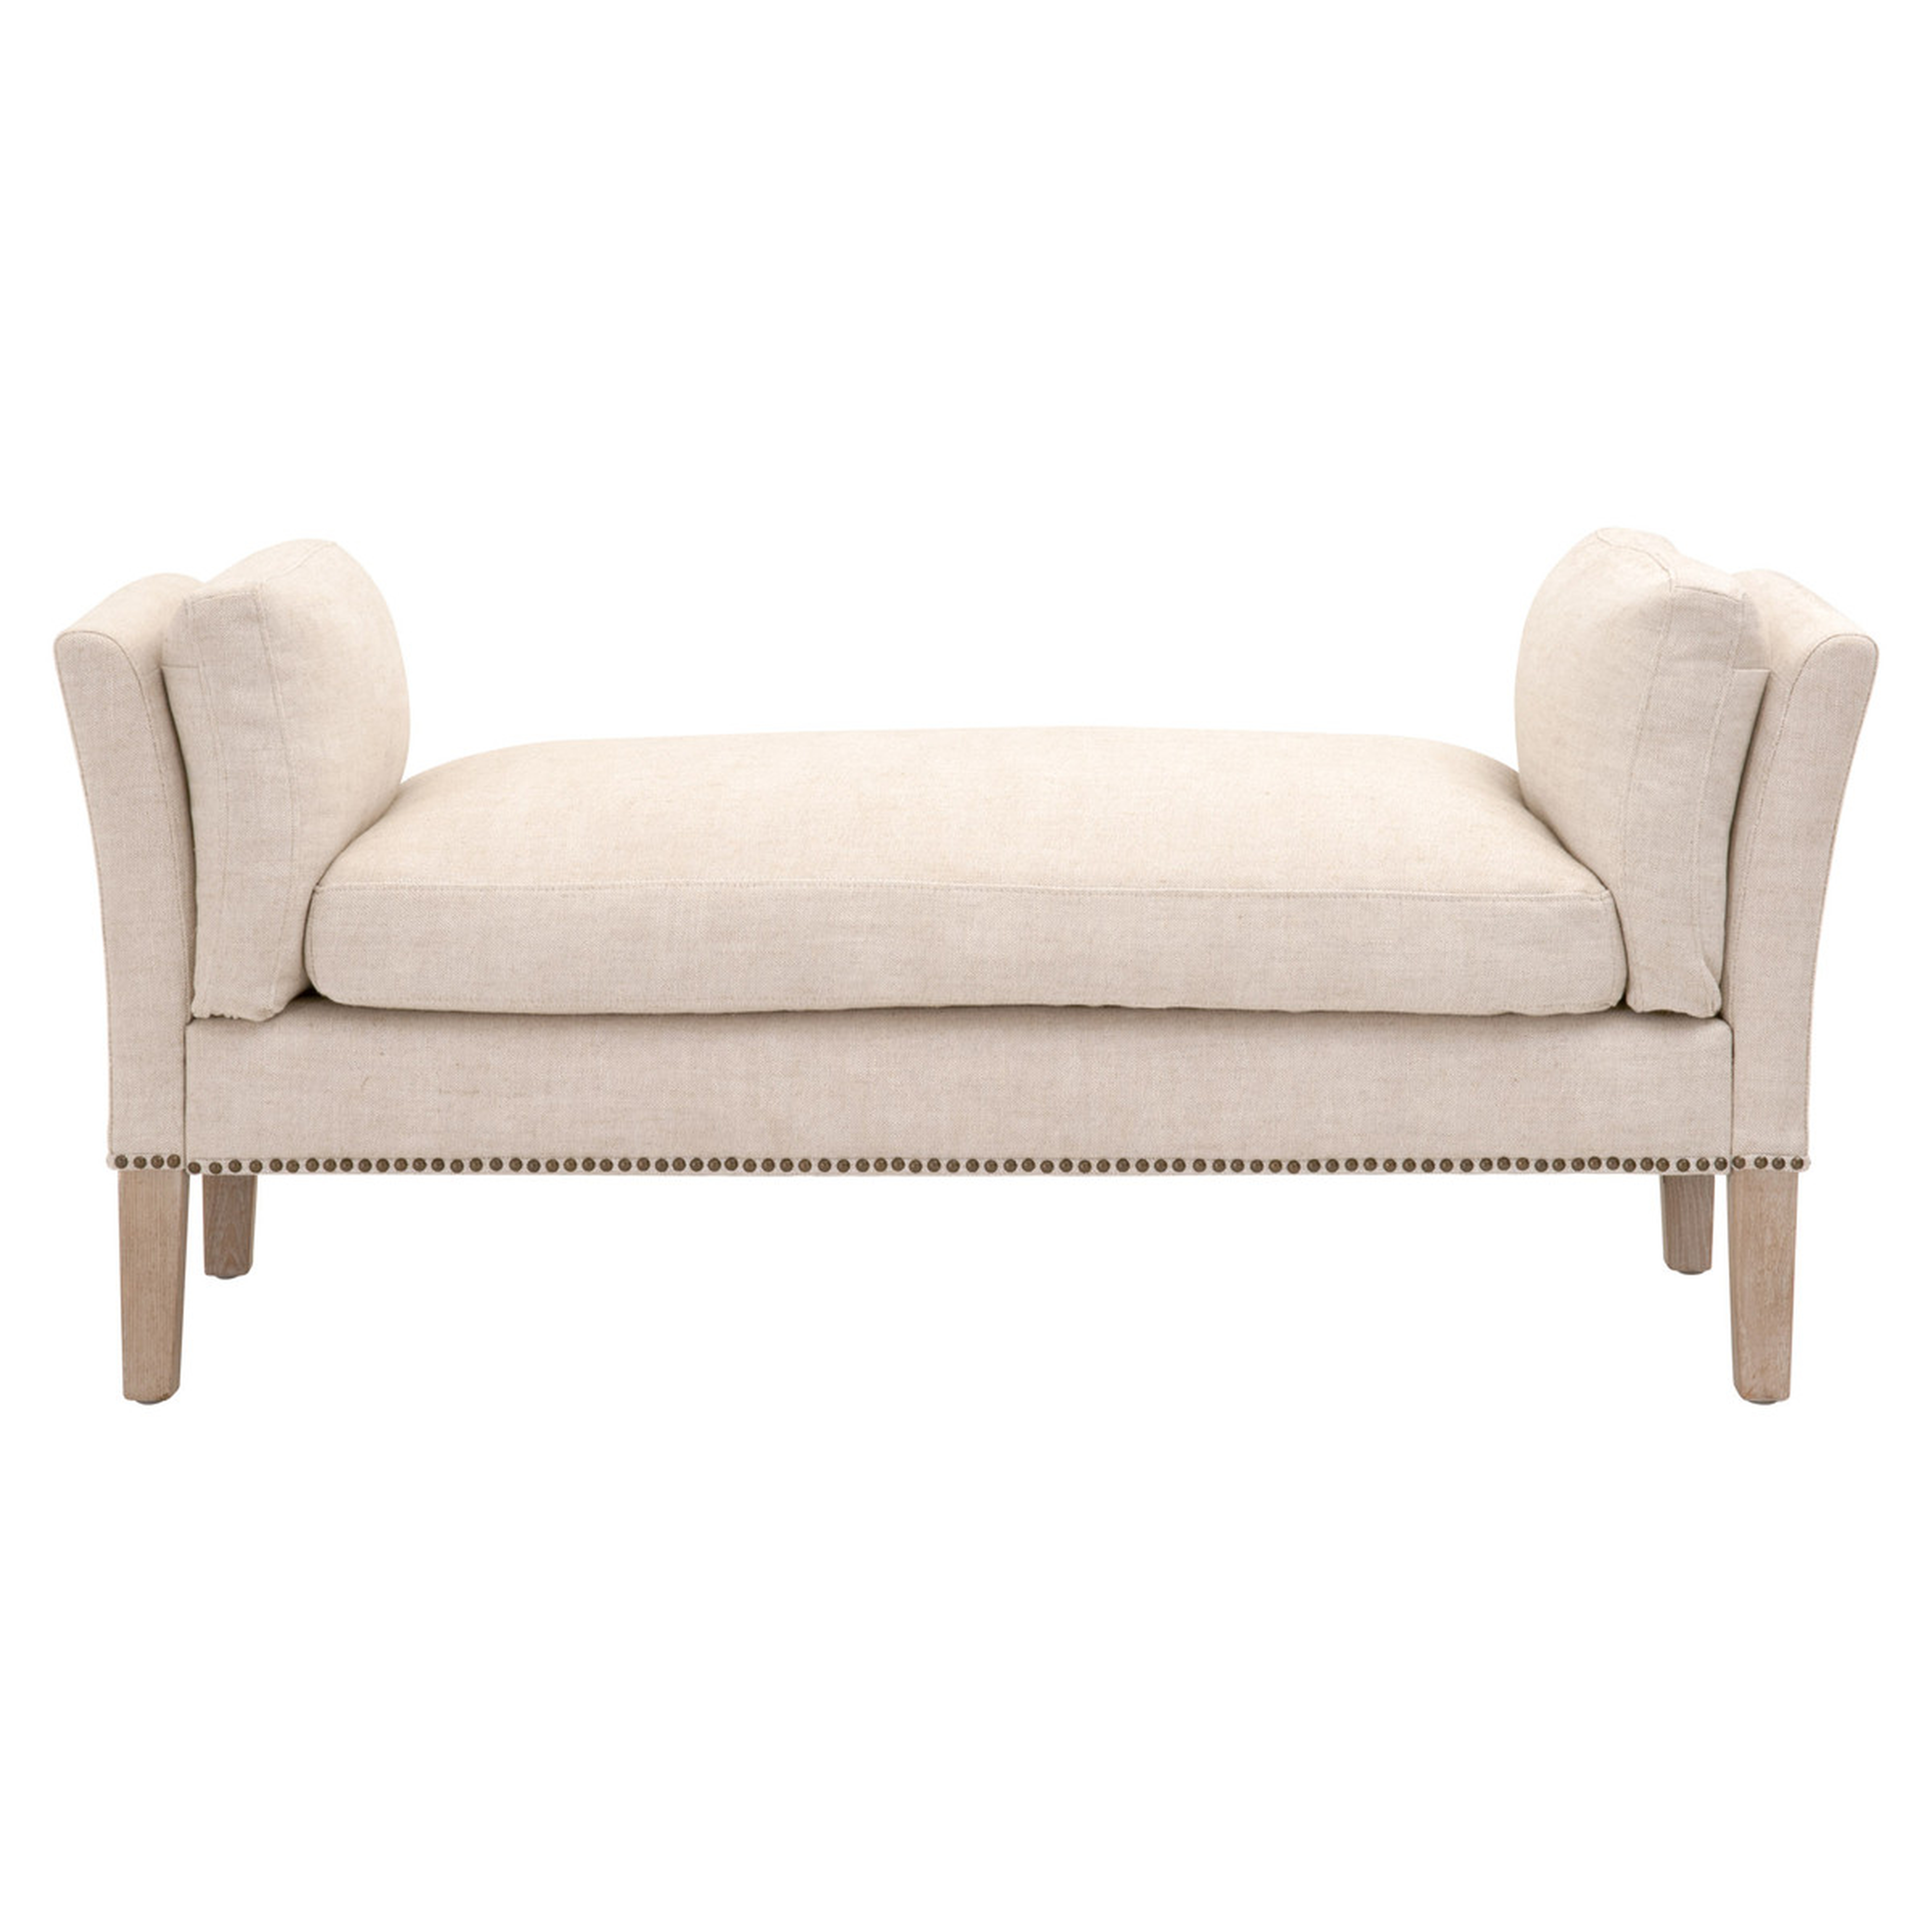 Minow Bench, Bisque French Linen, Natural Gray Ash - Cove Goods